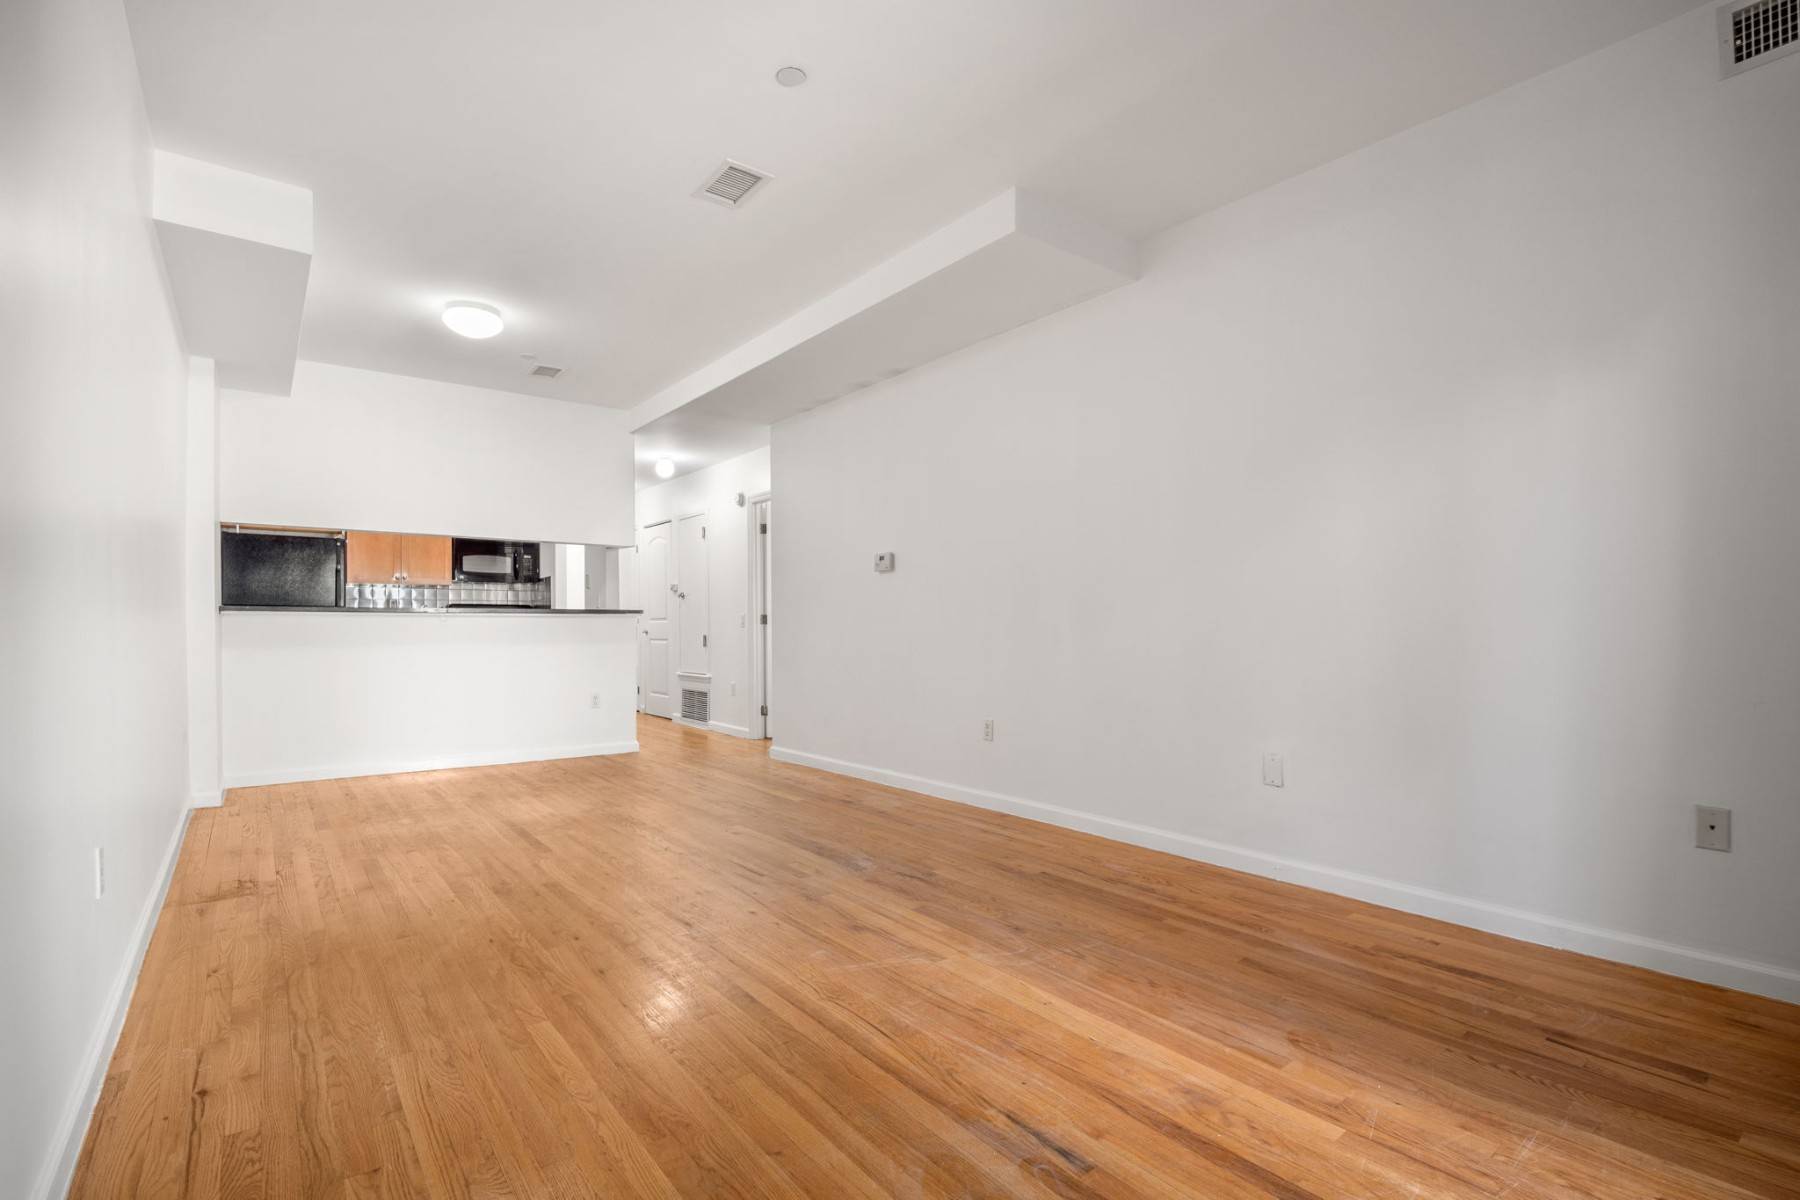 With a private and fenced outdoor patio, a multitude of closets, and in unit laundry, this 2 bed 2 bath sprawling condo is a truly unique find.